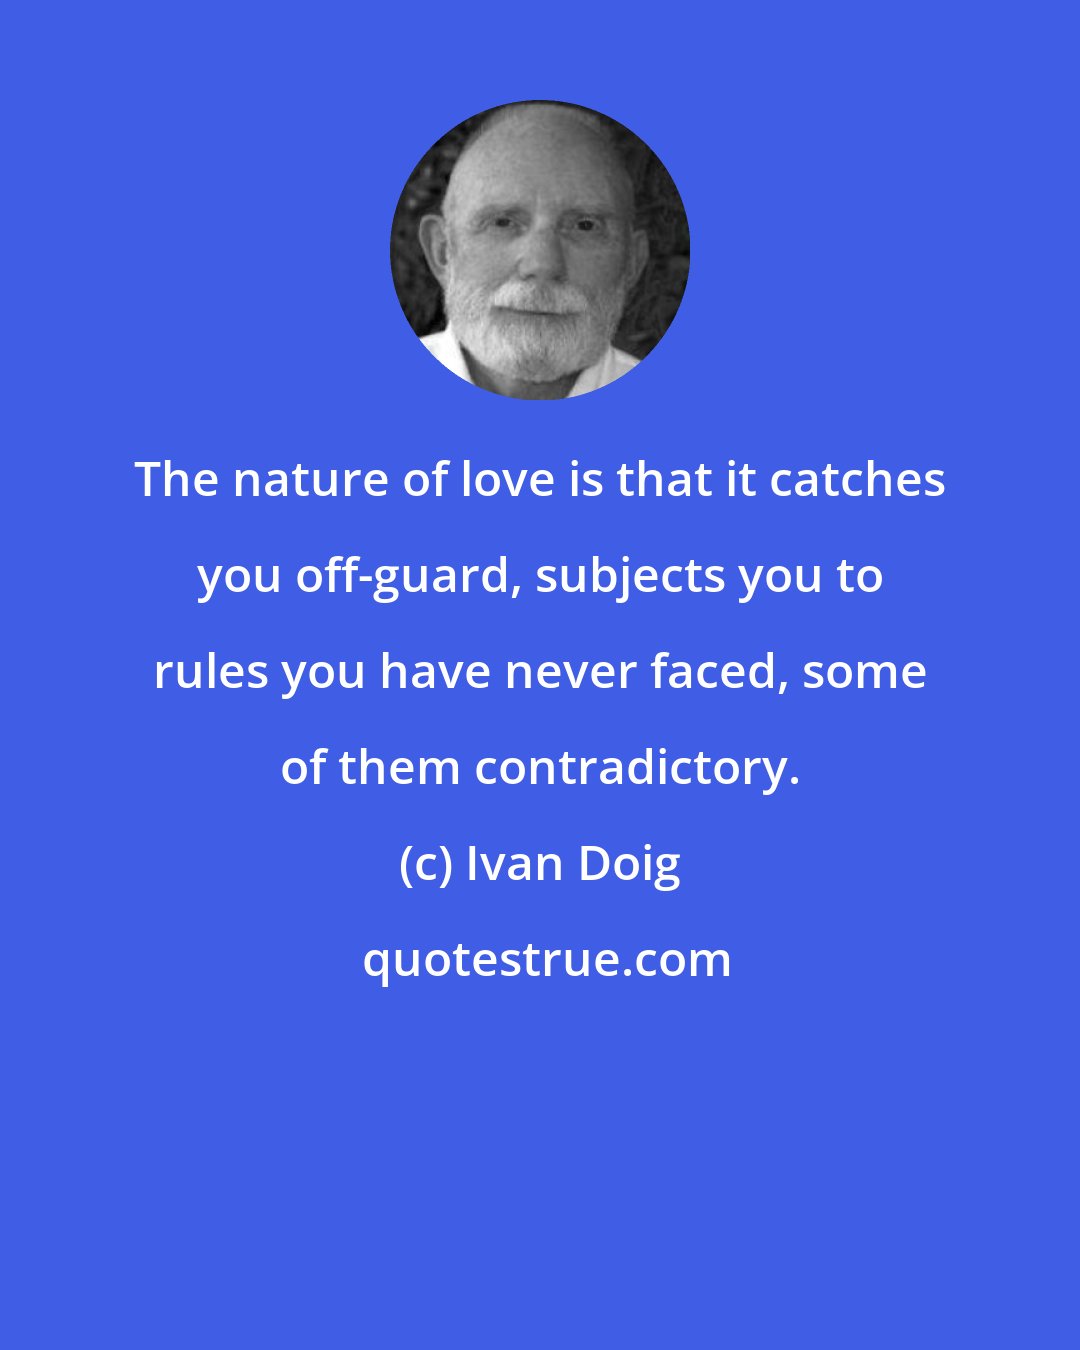 Ivan Doig: The nature of love is that it catches you off-guard, subjects you to rules you have never faced, some of them contradictory.